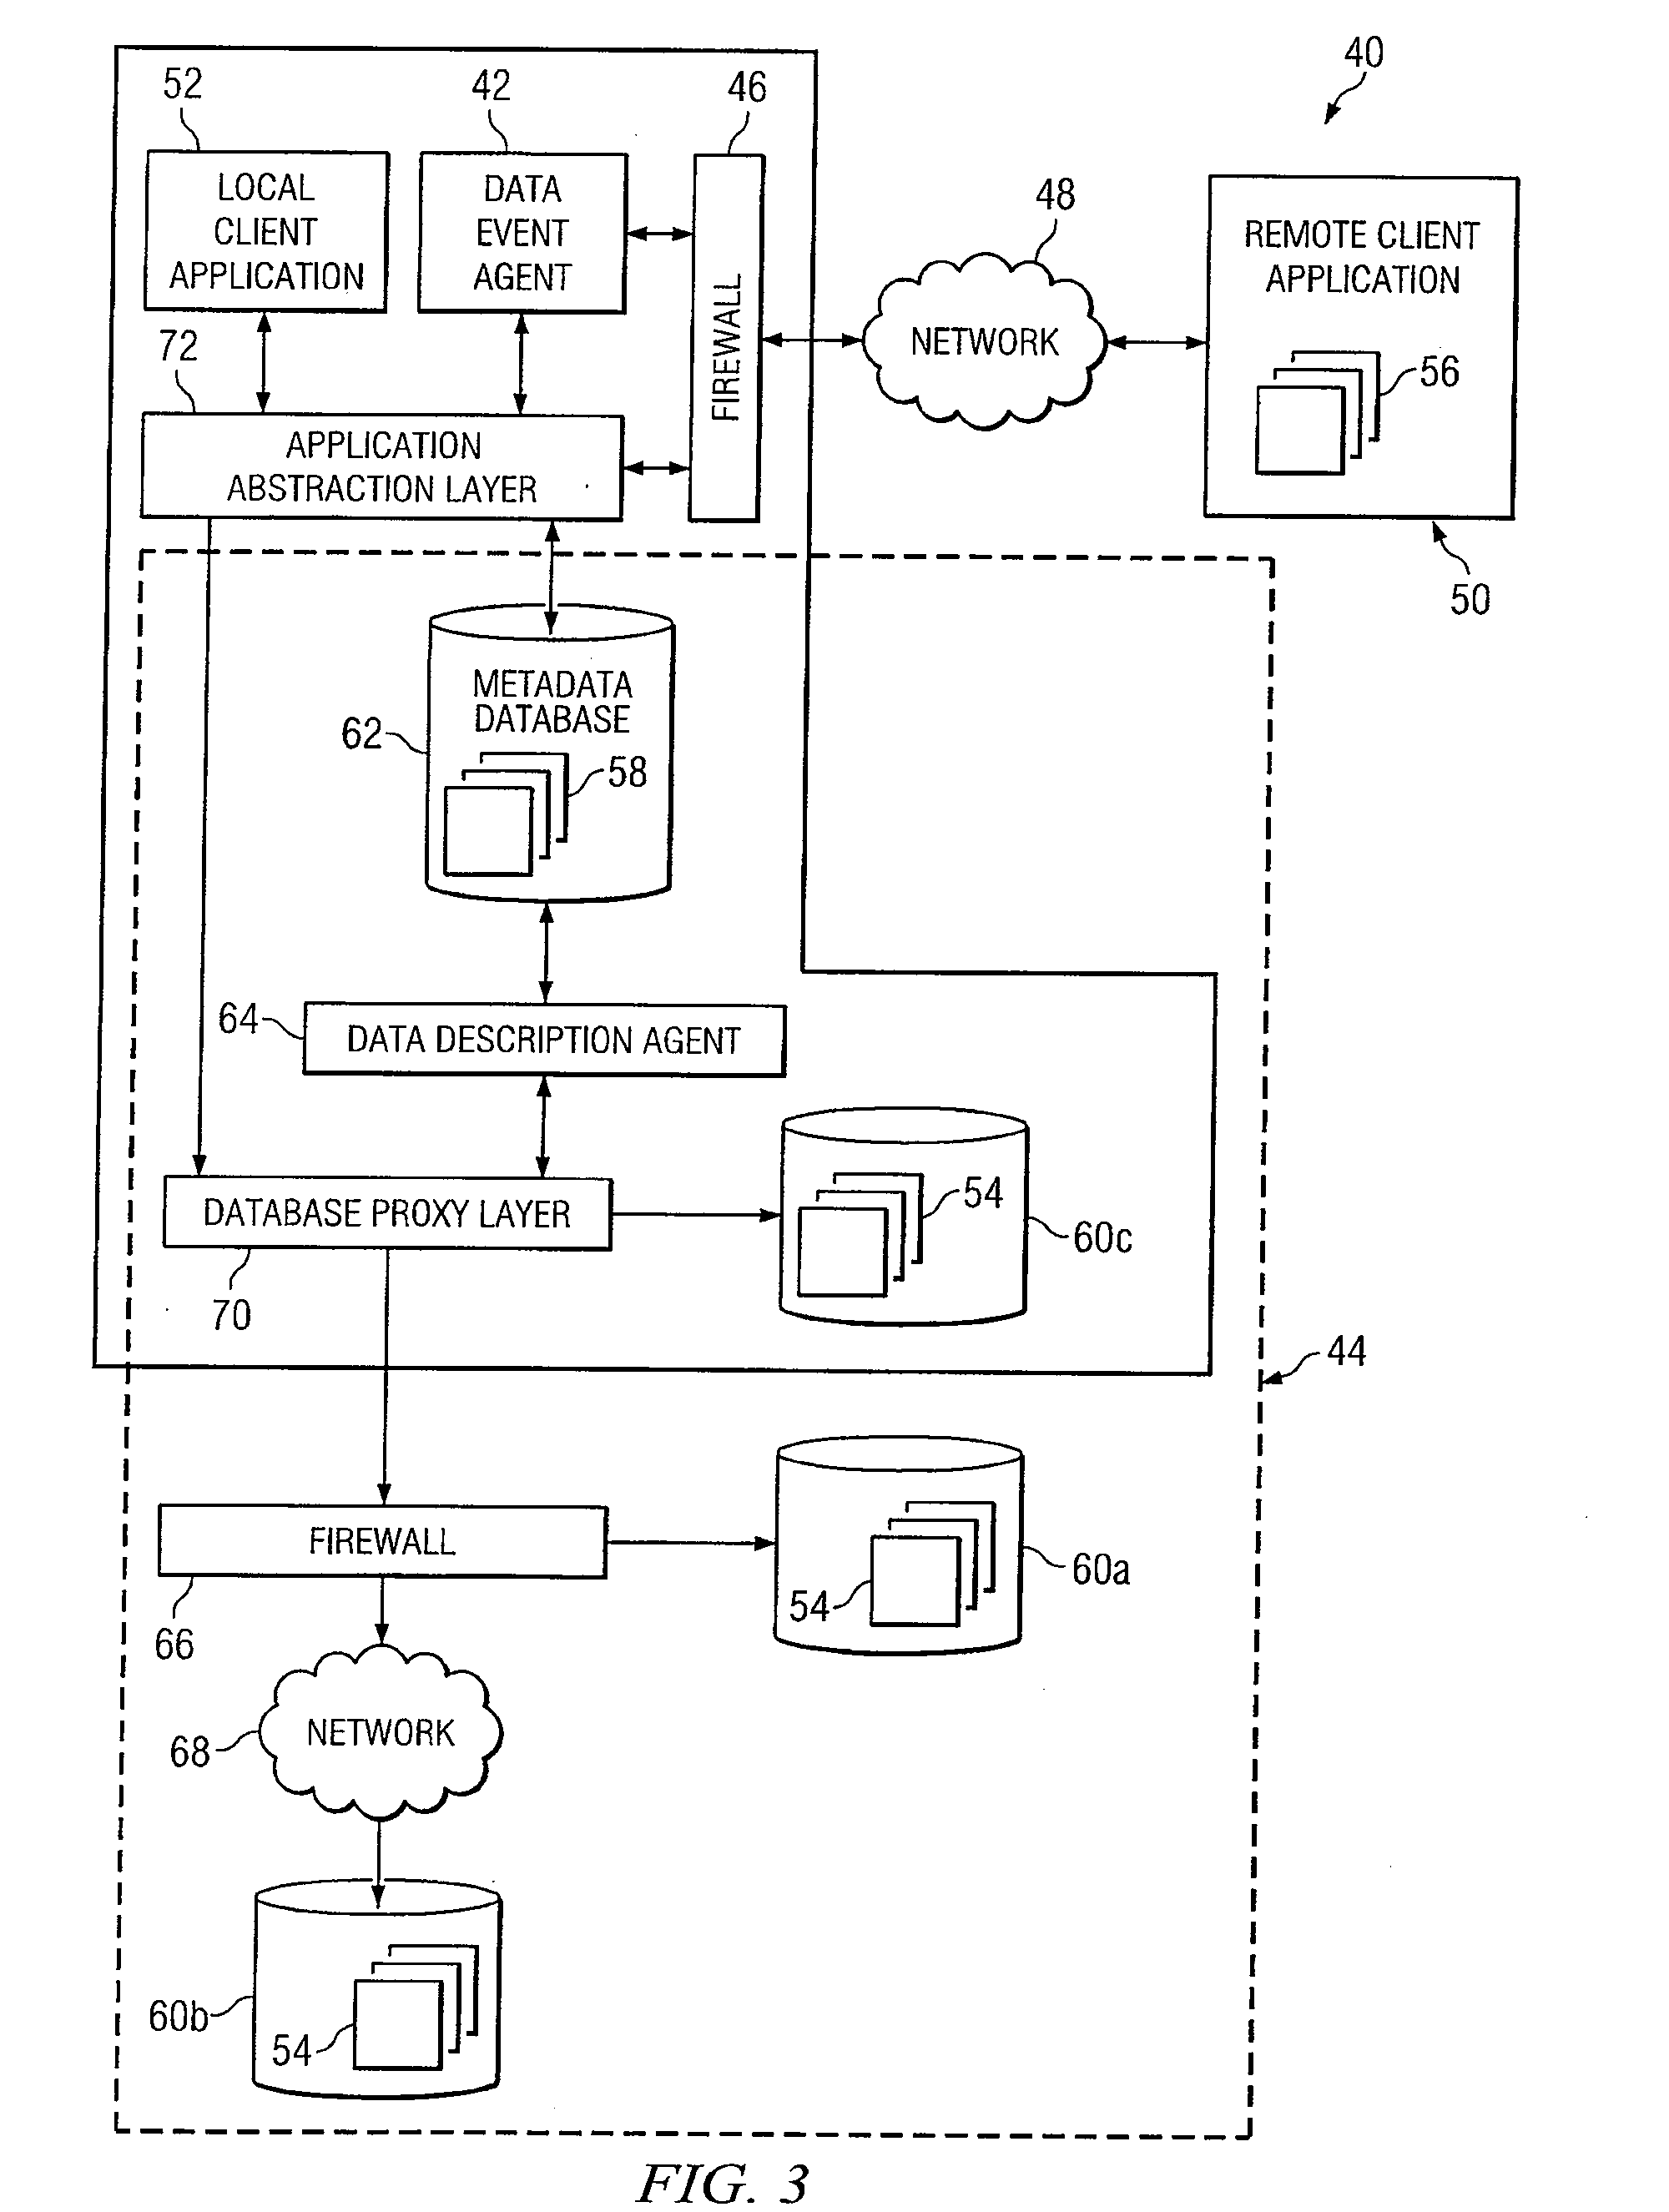 System and Method for Providing Remote Access to Events From A Database Access System